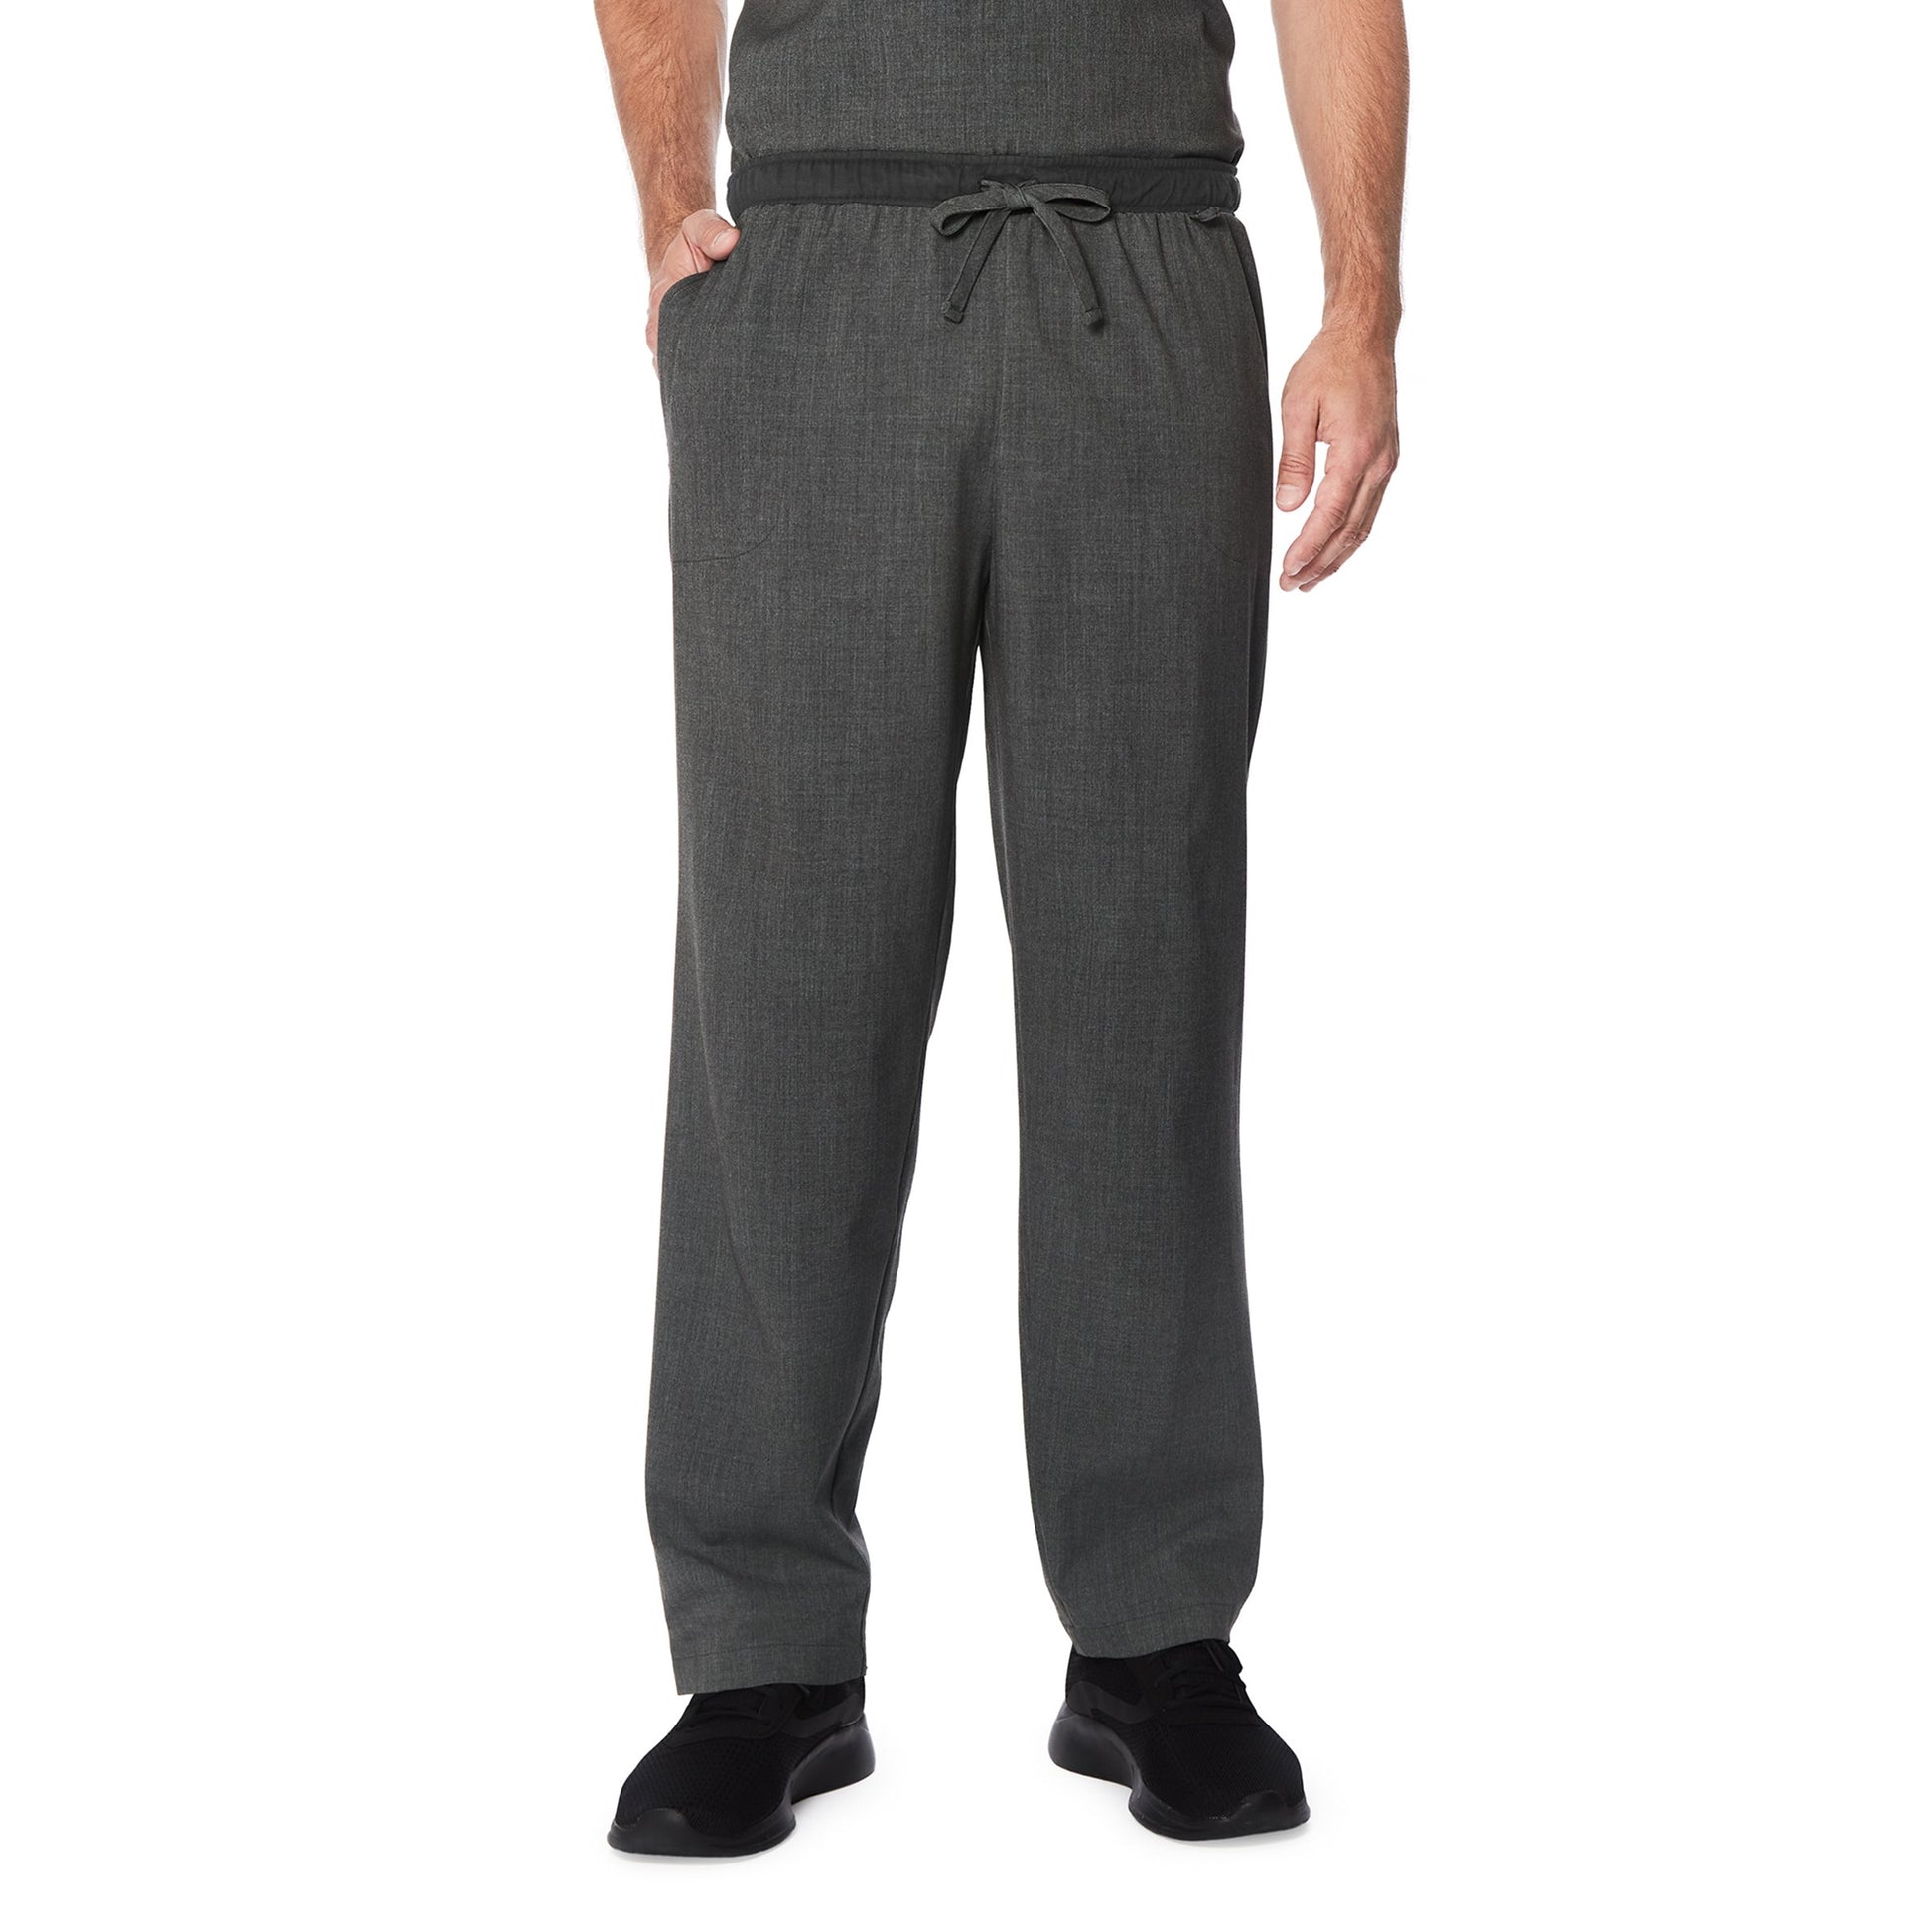 Charcoal Heather;Model is wearing size M. He is 6'2", Waist 32", Inseam 32".@A man wearing charcoal heather scrub classic pant.